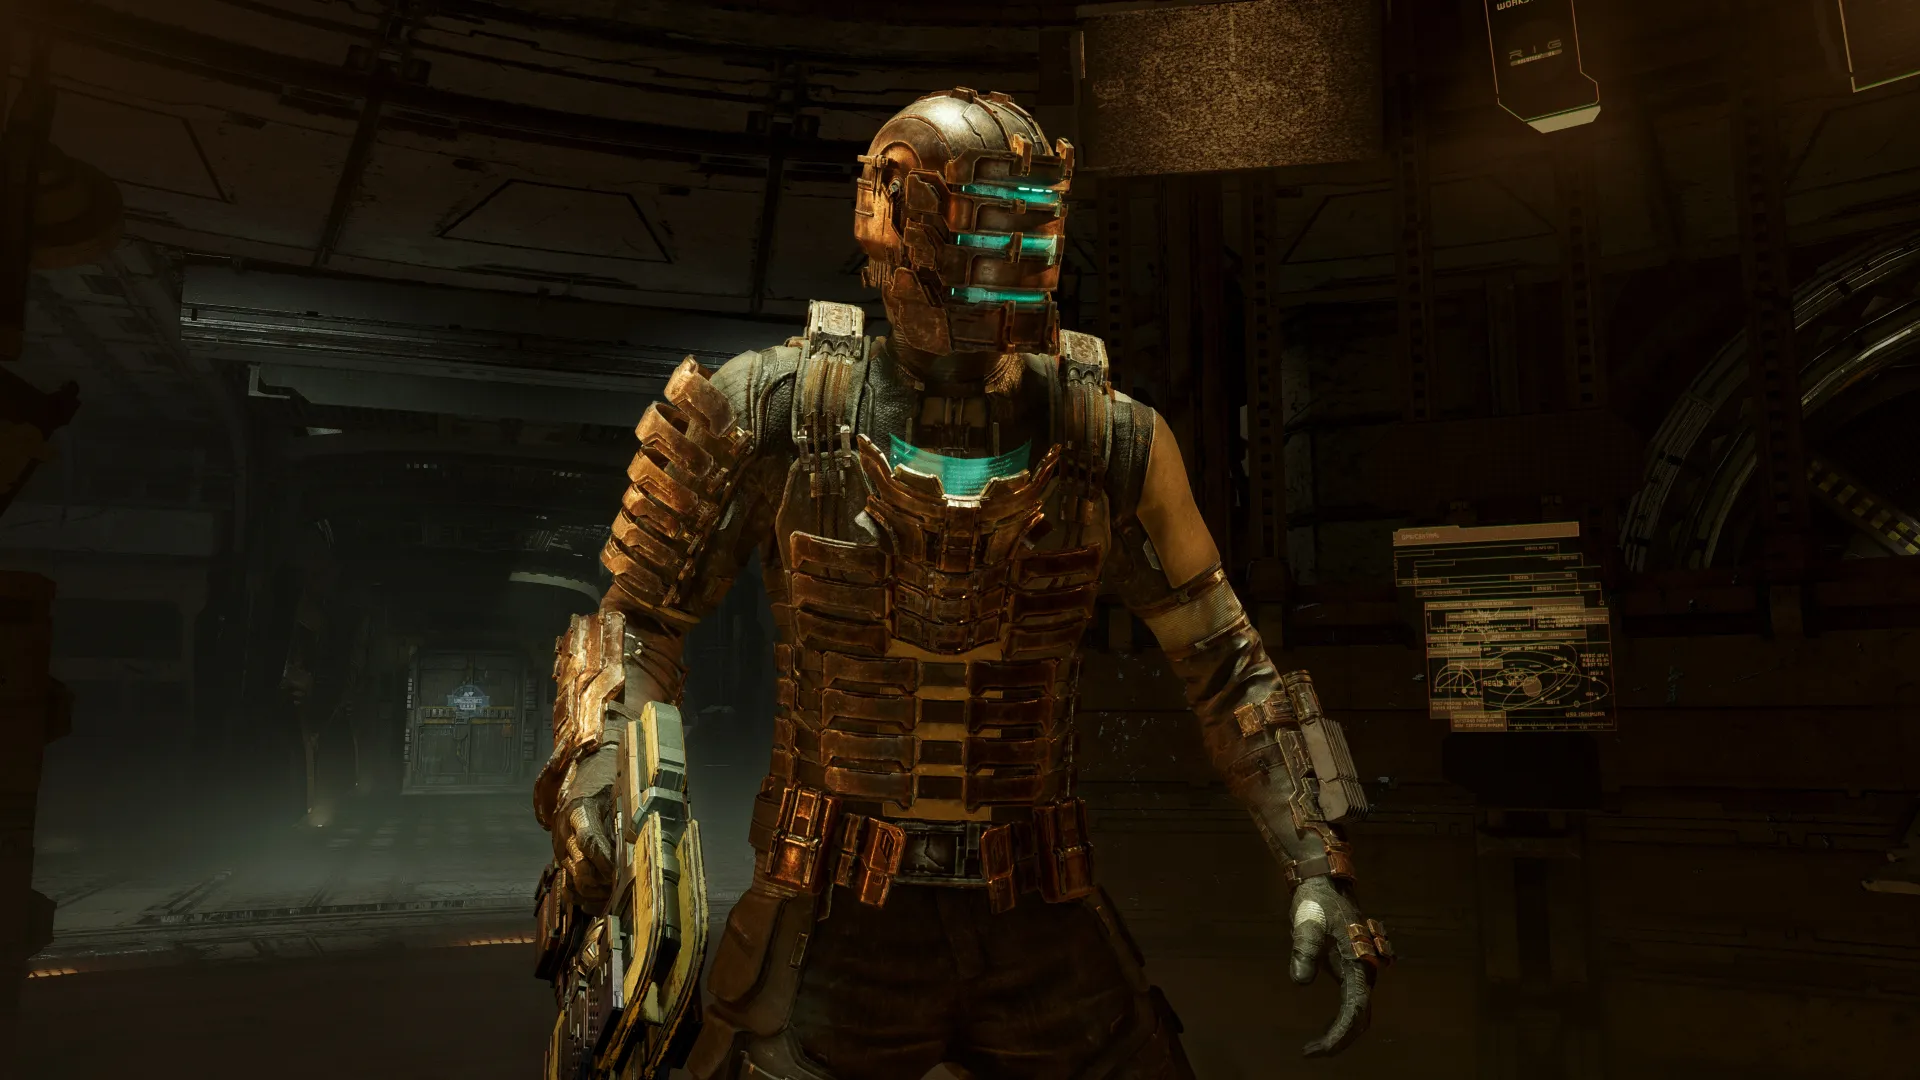 A bug that allows players to receive an infinite amount of game currency was found in the Dead Space remake